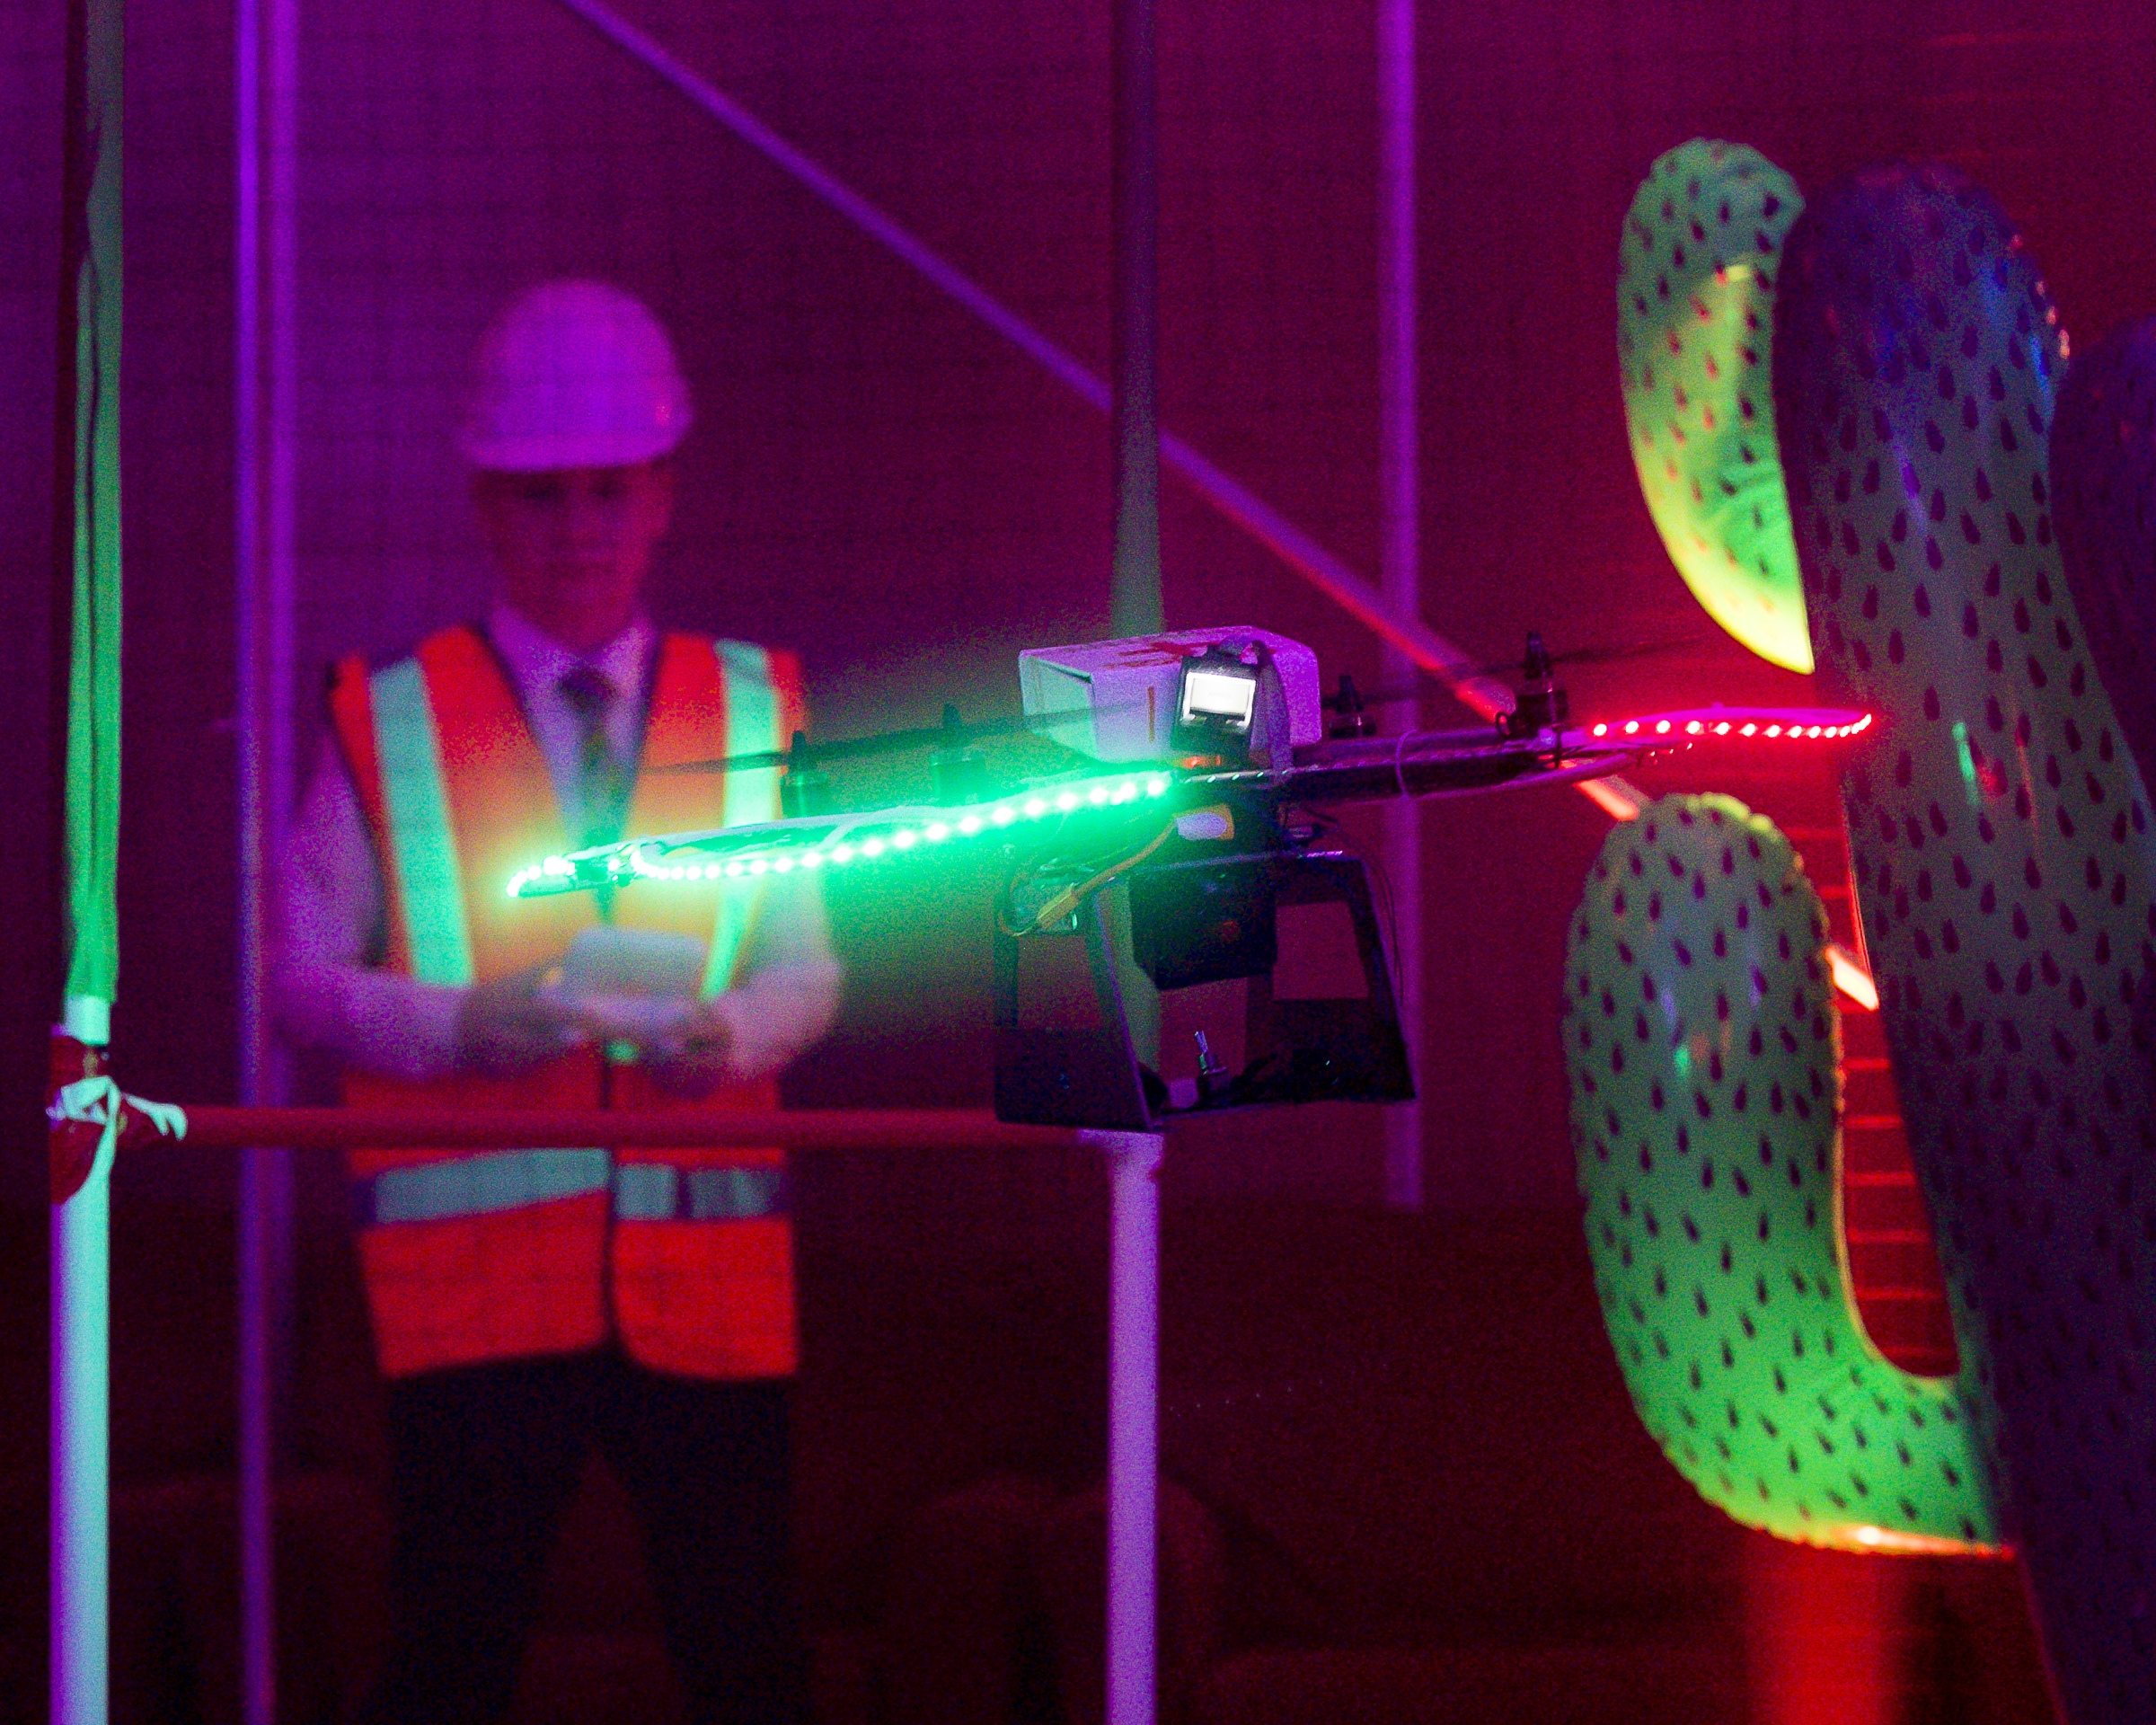 Image shows a school student flying a quadcopter model with LED lights and cactus tree obstacles.